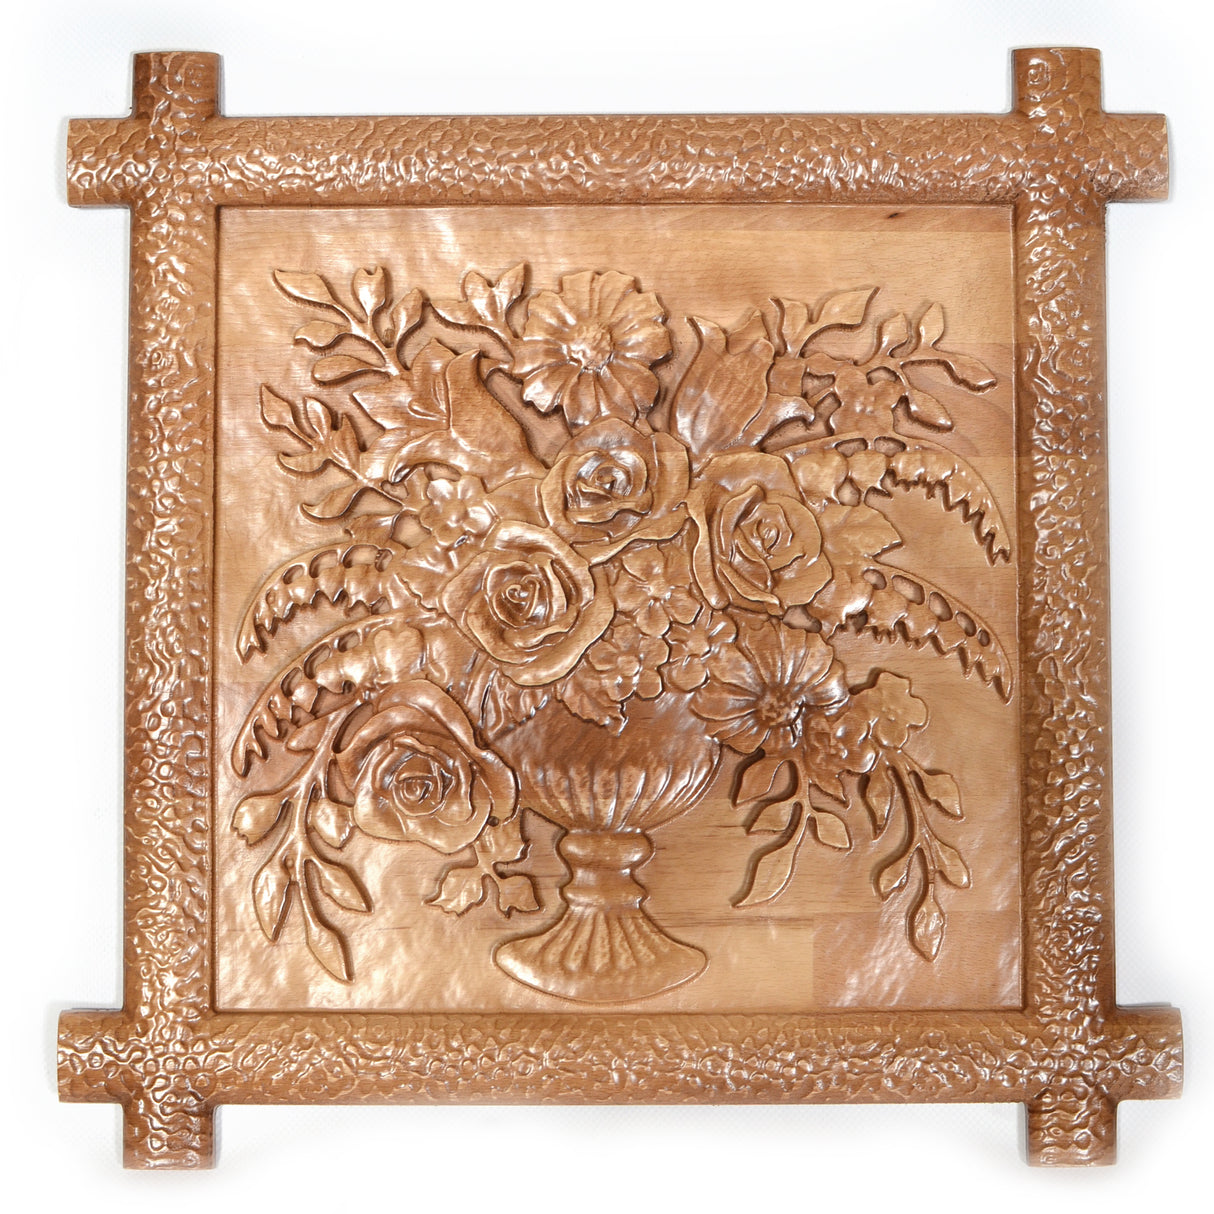 The Flower Bouquet Ukrainian Beech Wood Carved Plaque 16 Inches in Brown color, Square shape